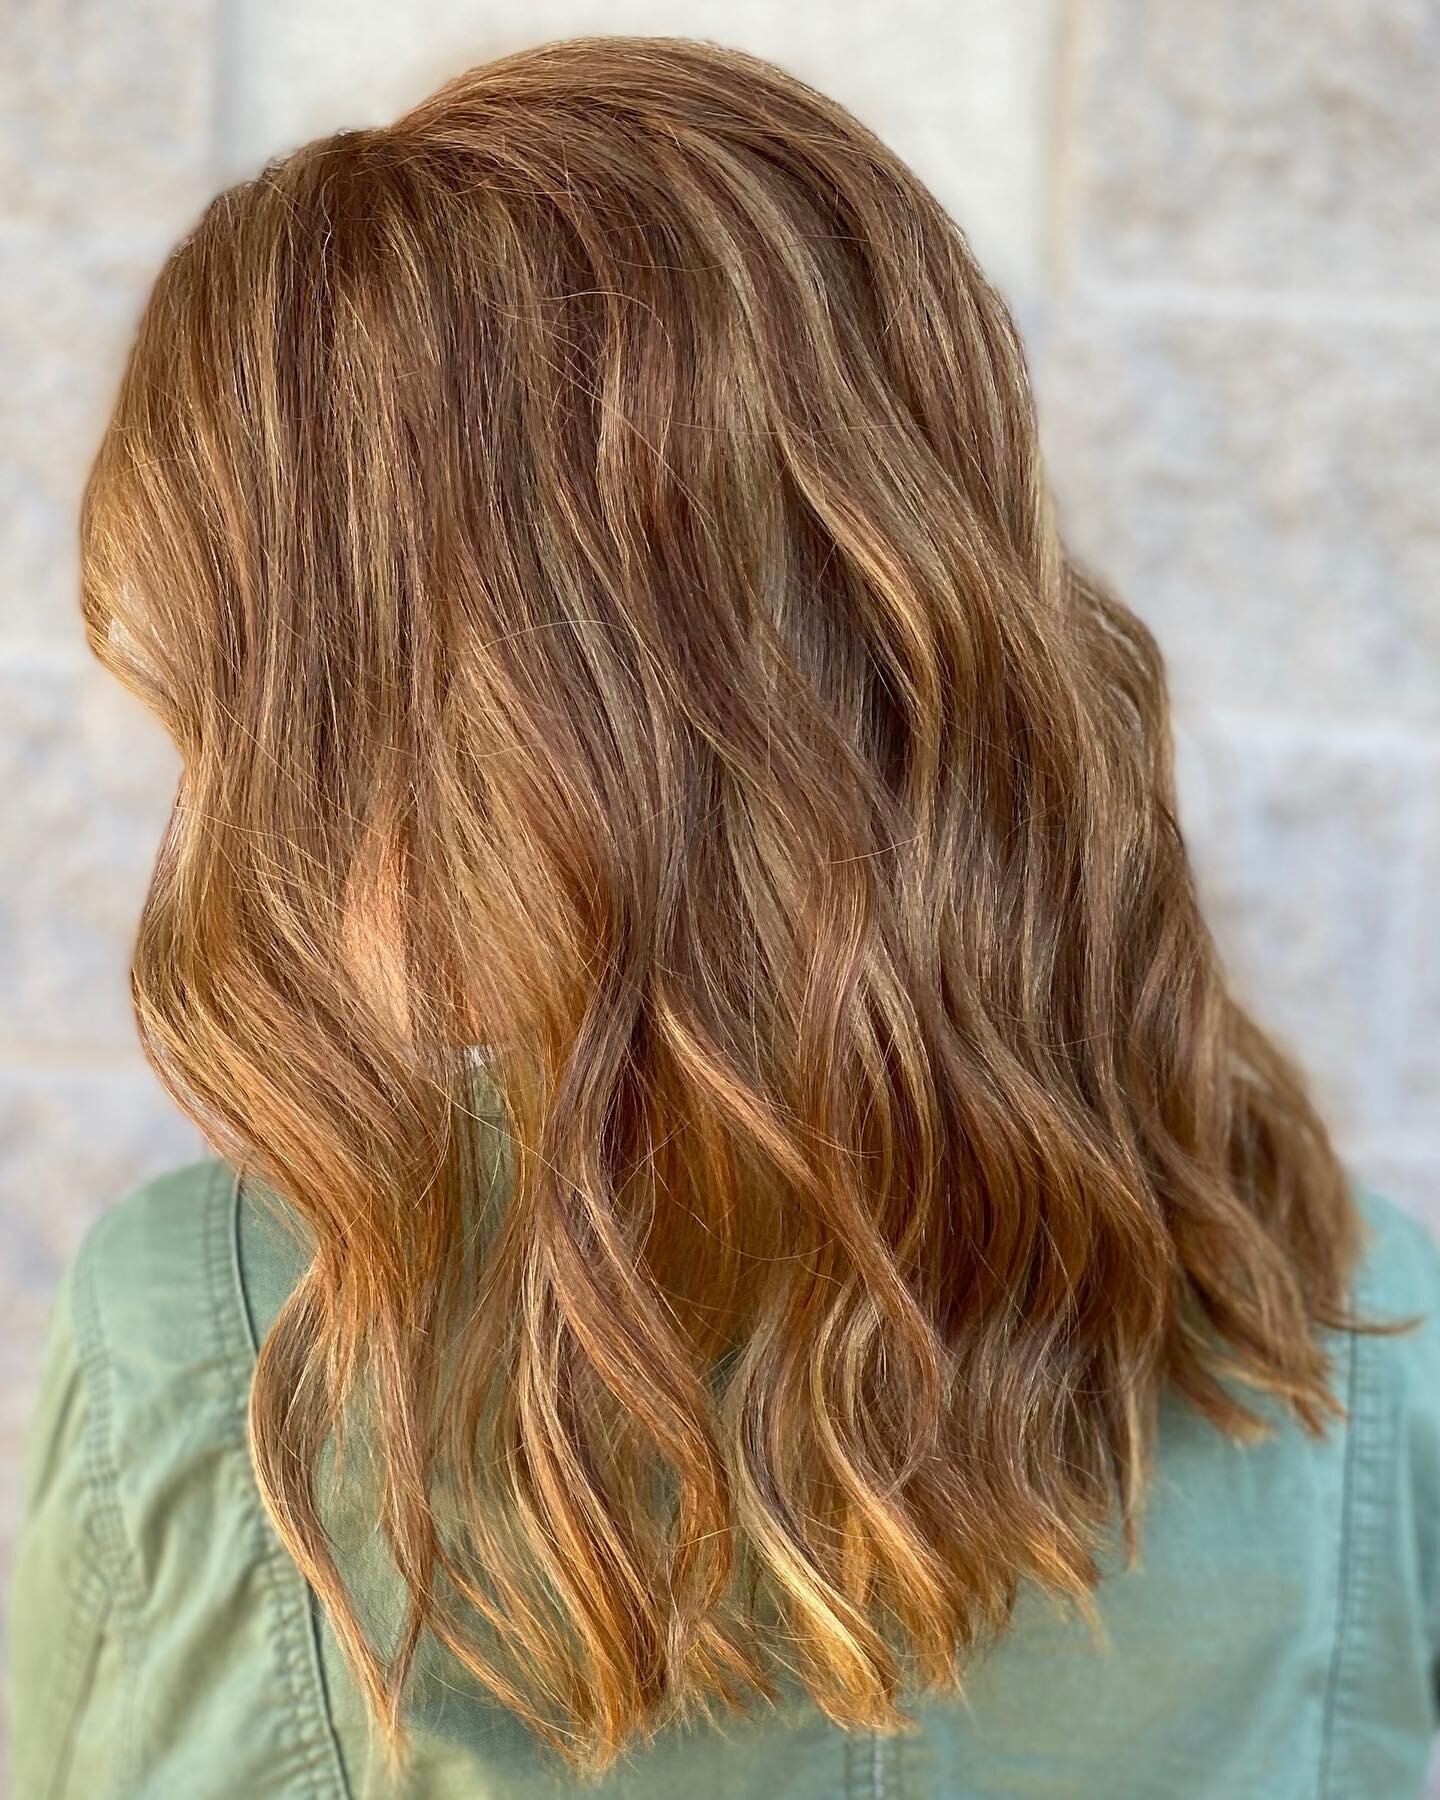 Gorgeous copper blonde for summer 🔥 cut &amp; color by @hairbyallieryan